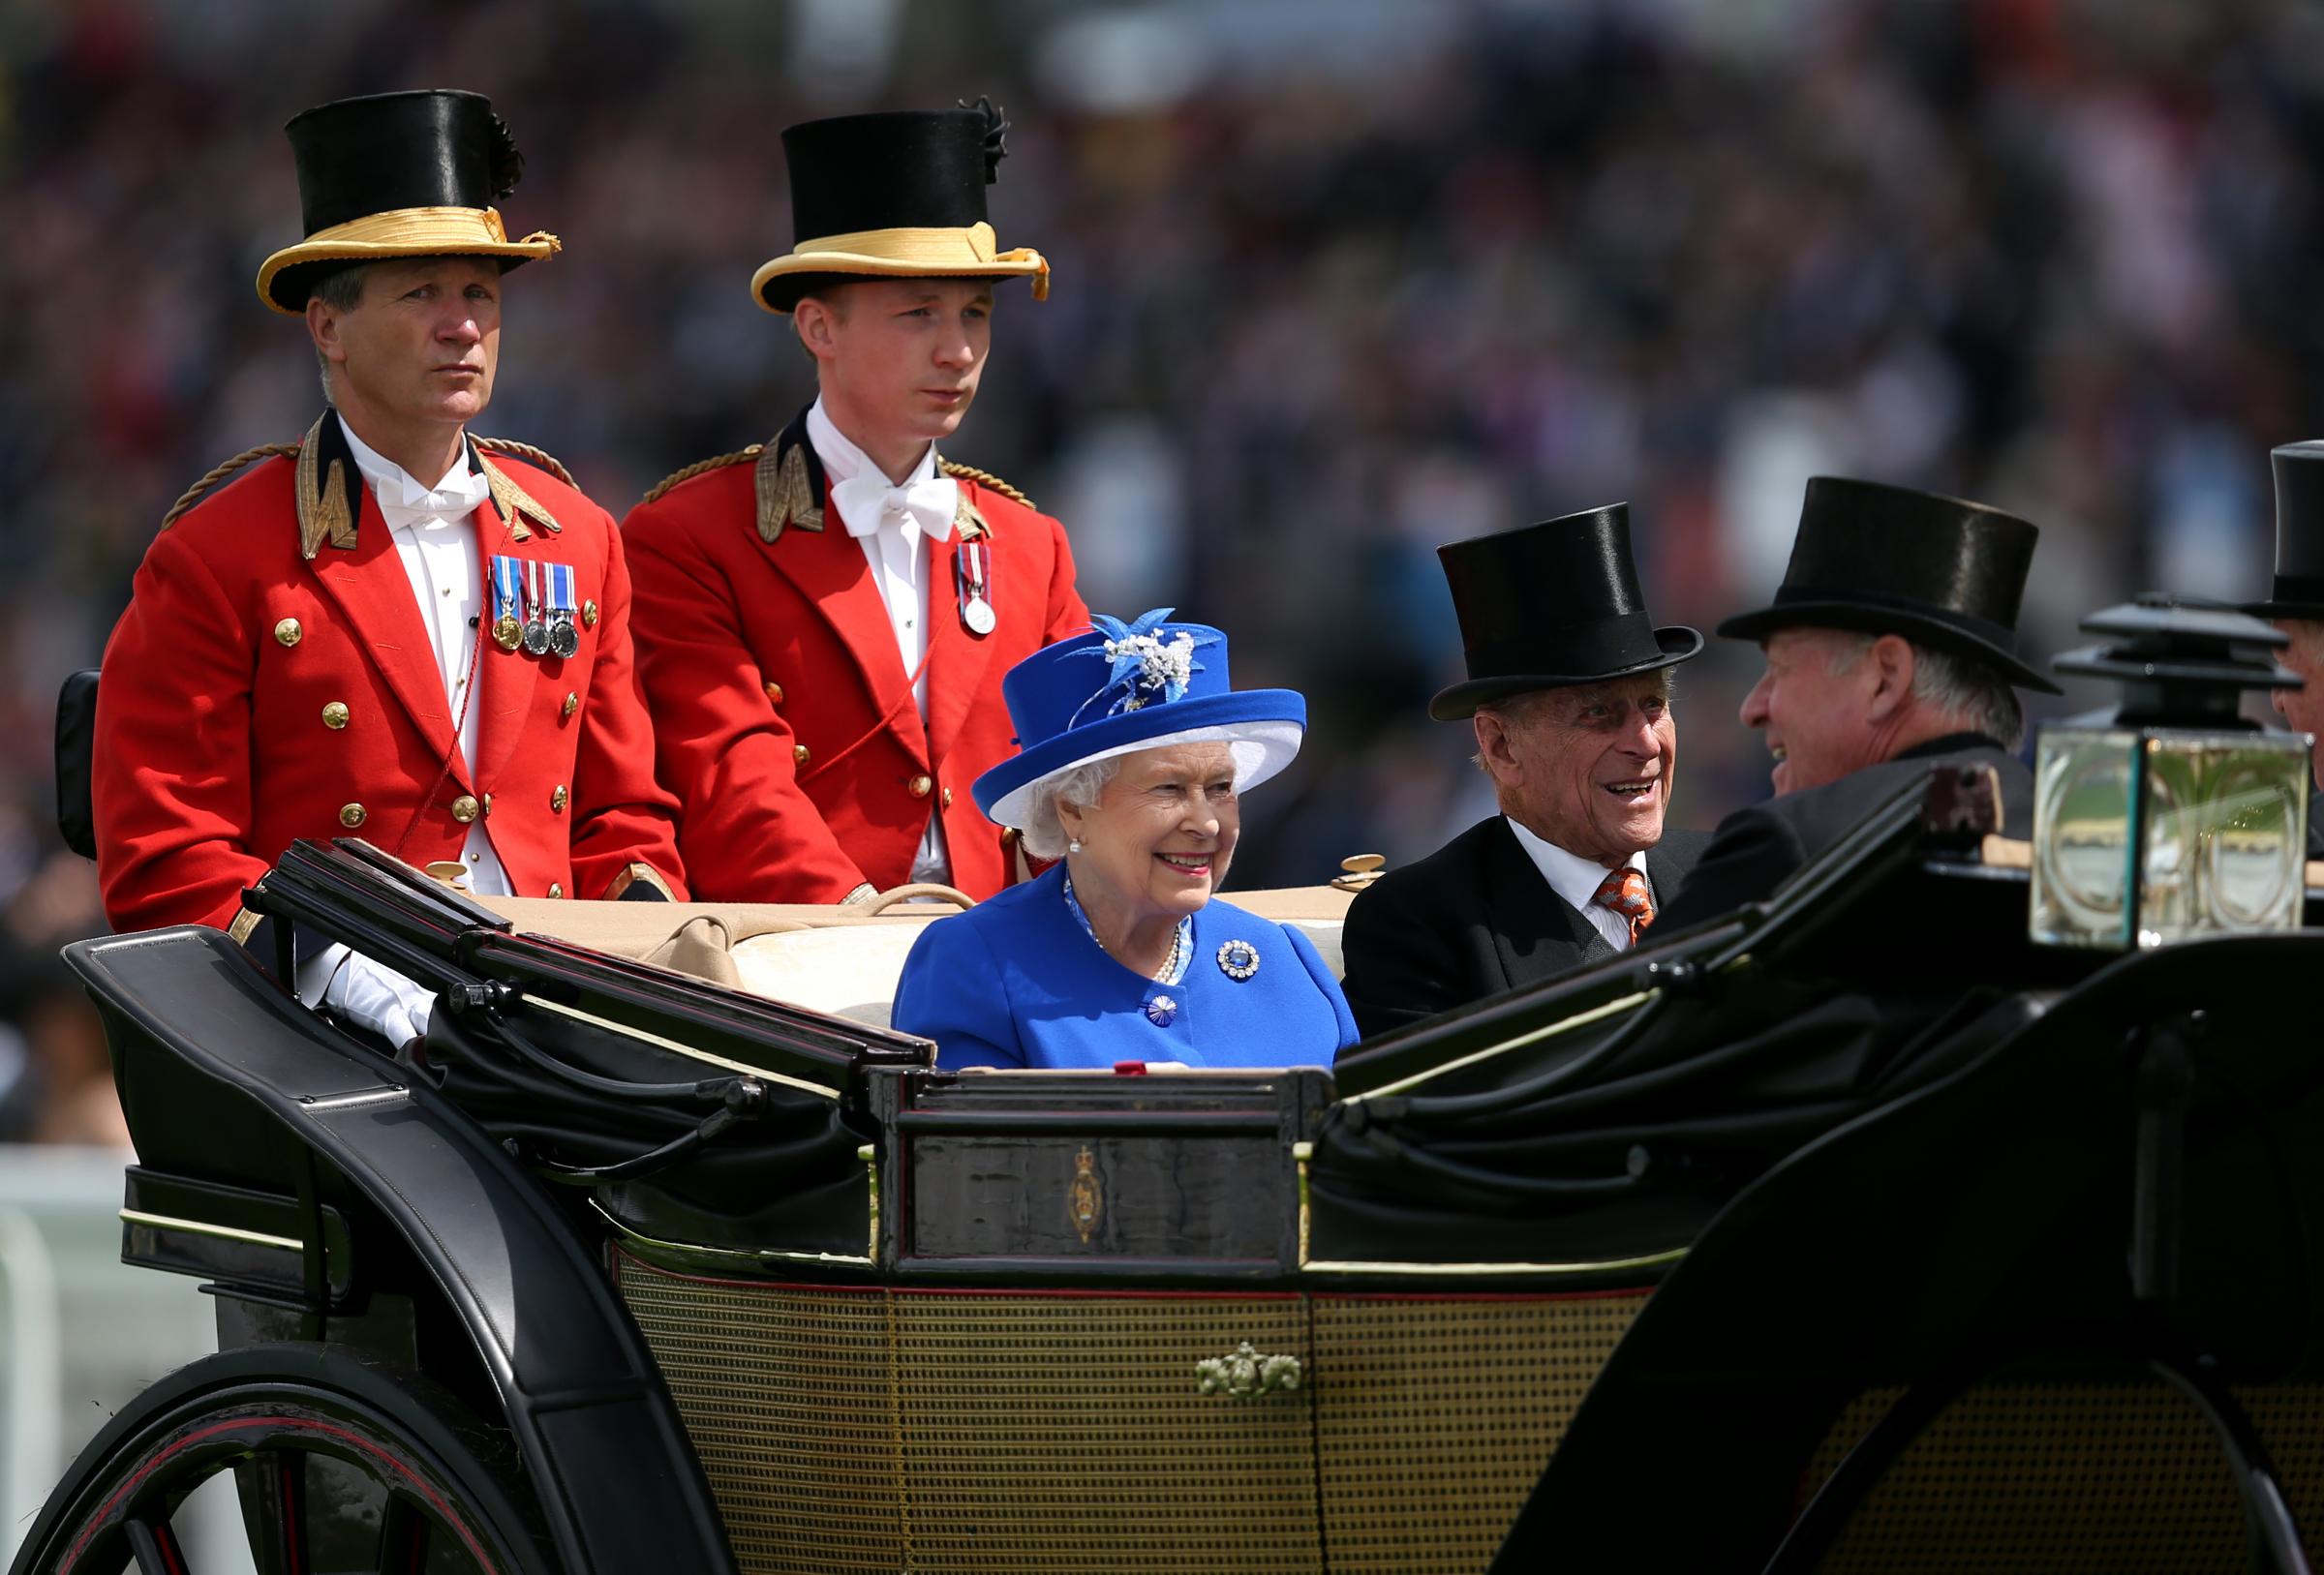 File photo dated 17/06/15 of Queen Elizabeth ll and Duke of Edinburgh with Lord Samuel Vestey (right) arriving on day two of the 2015 Royal Ascot Meeting at Ascot Racecourse, Berkshire. The Queens friend and former Master of the Horse Lord Vestey has